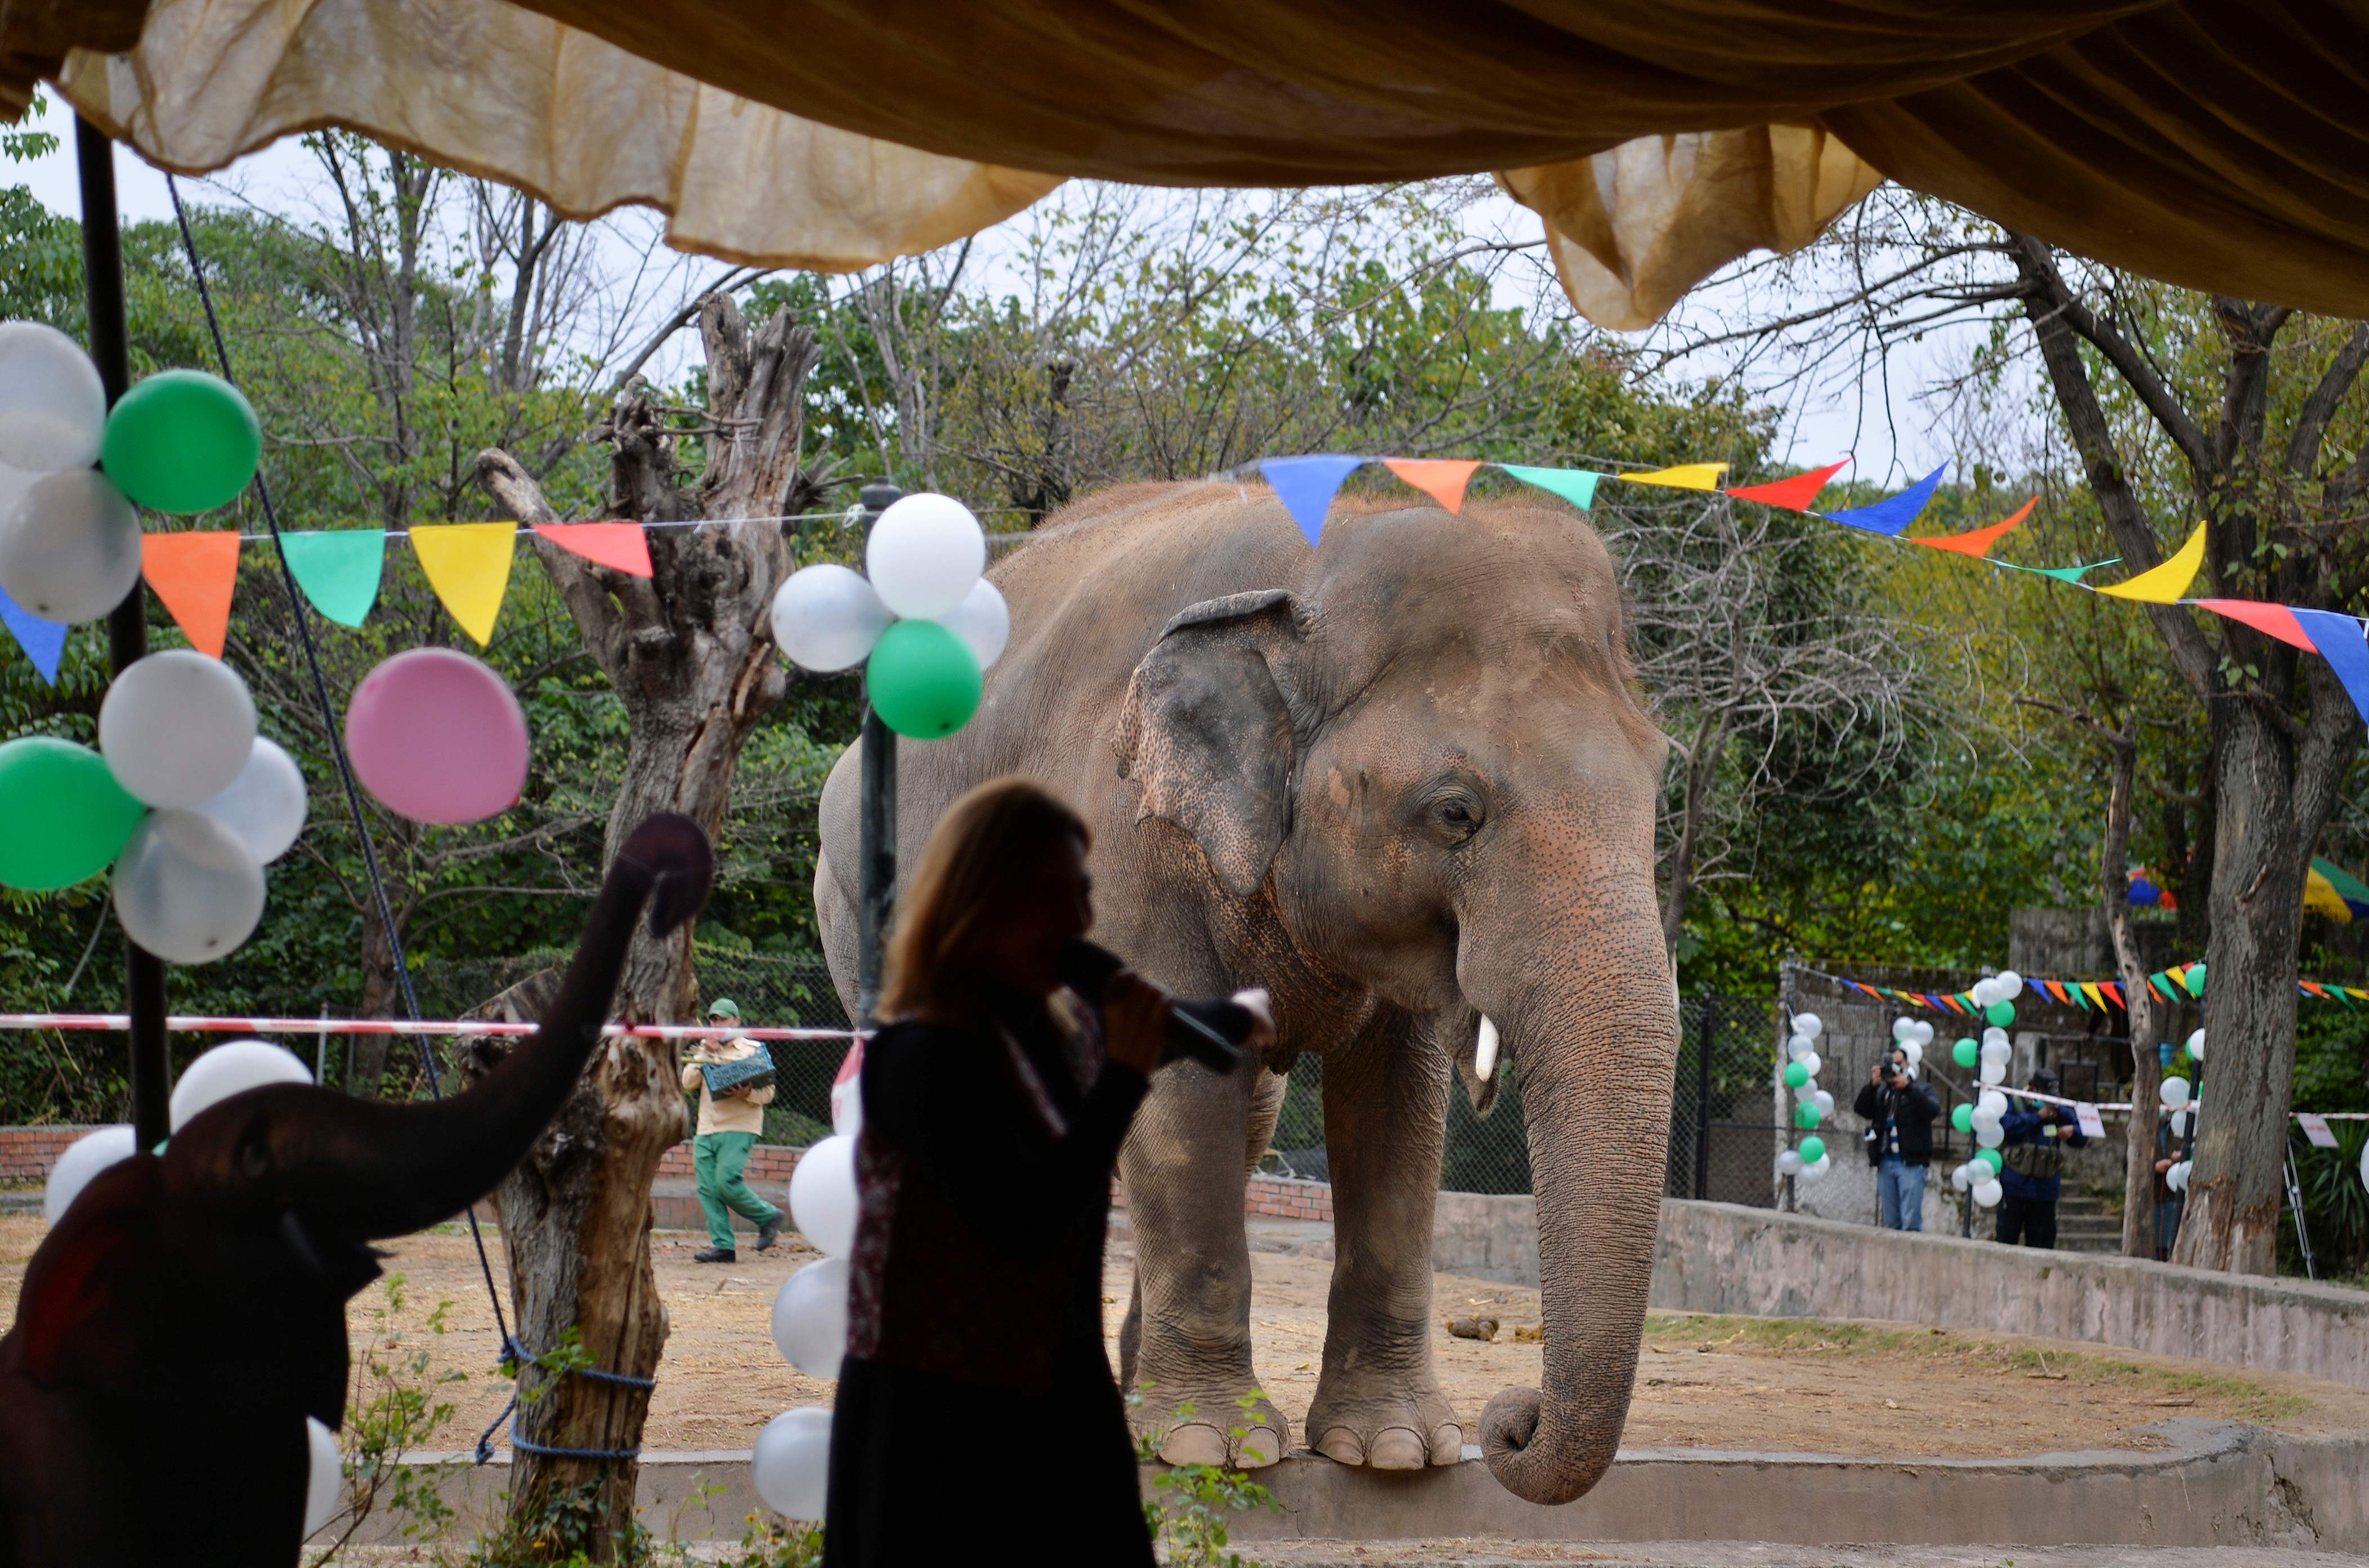 A singer performs for Kavaan, Pakistan's only Asian elephant, during his farewell ceremony before travelling to a sanctuary in Cambodia later this month, at the Marghazar Zoo in Islamabad on November 23, 2020. (Photo by Farooq NAEEM / AFP)